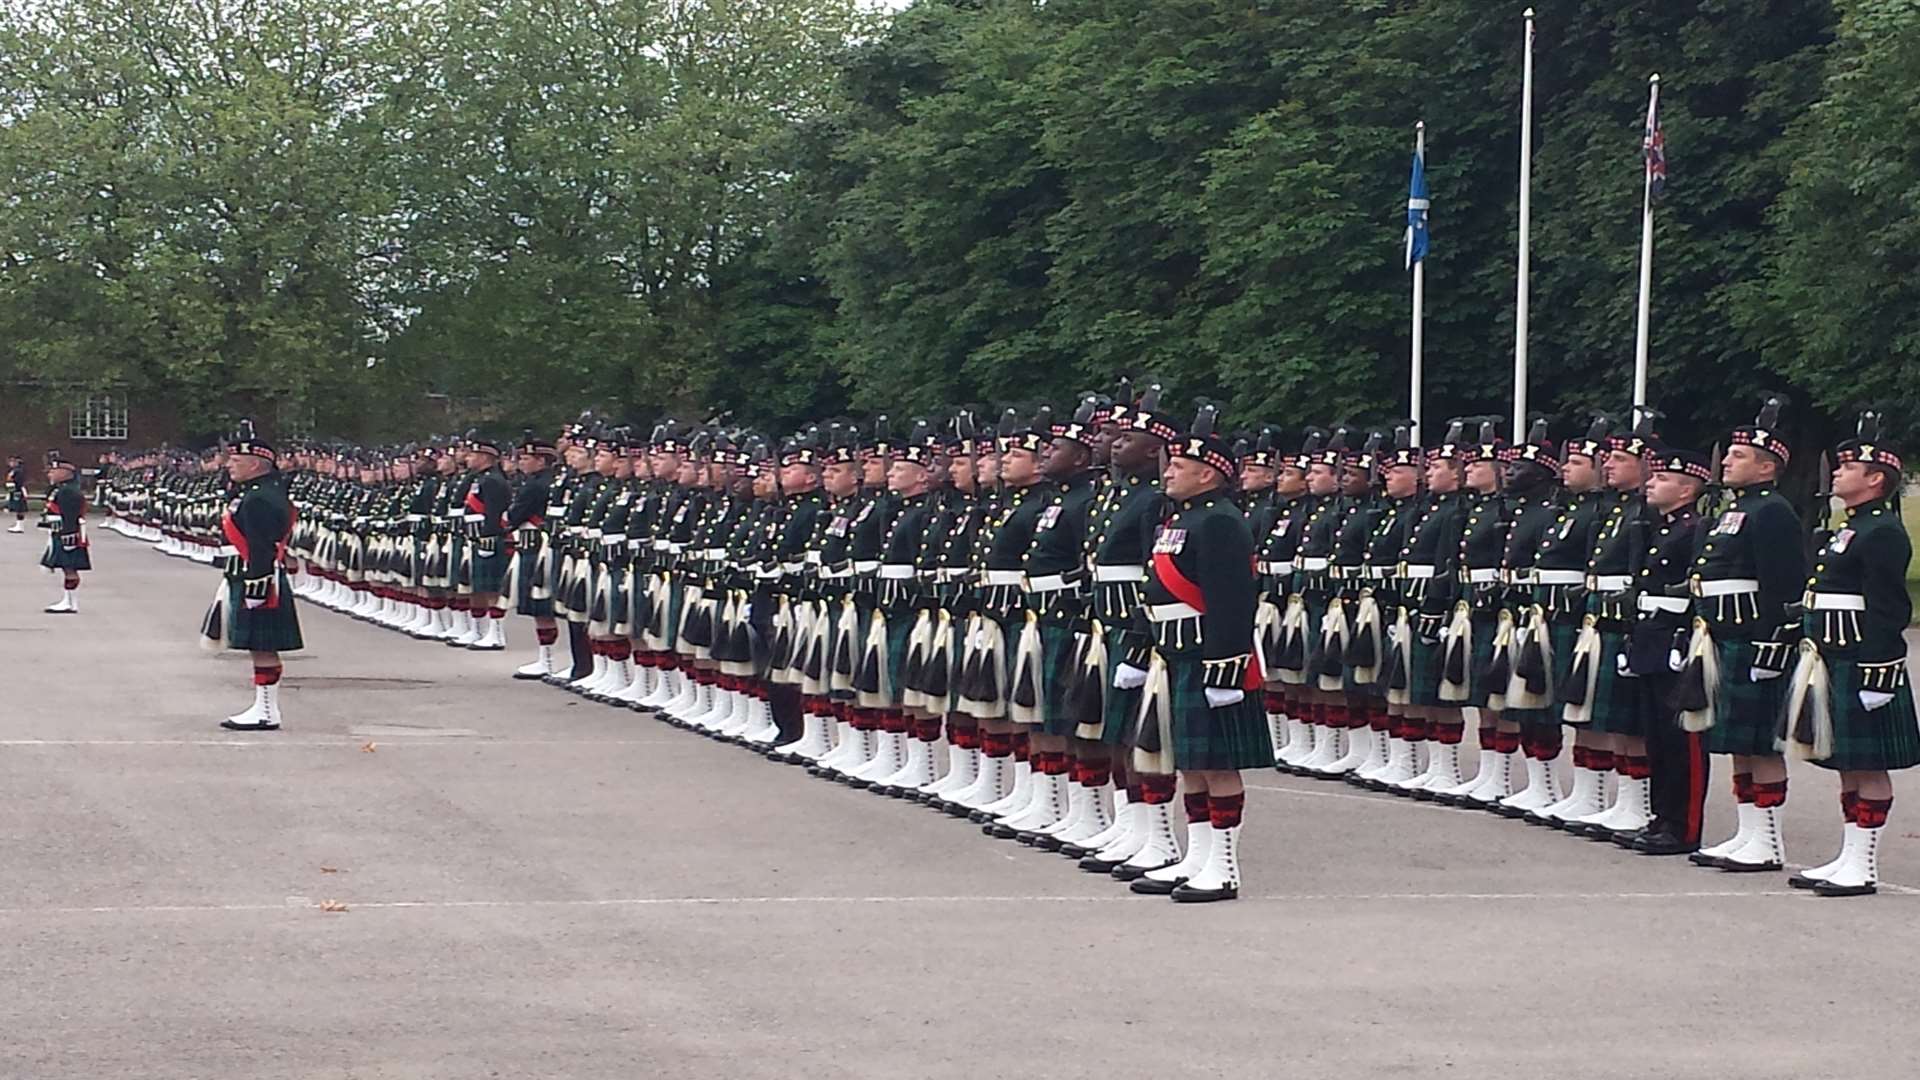 Soldiers from 5 SCOTS on parade ground at Howe Barracks